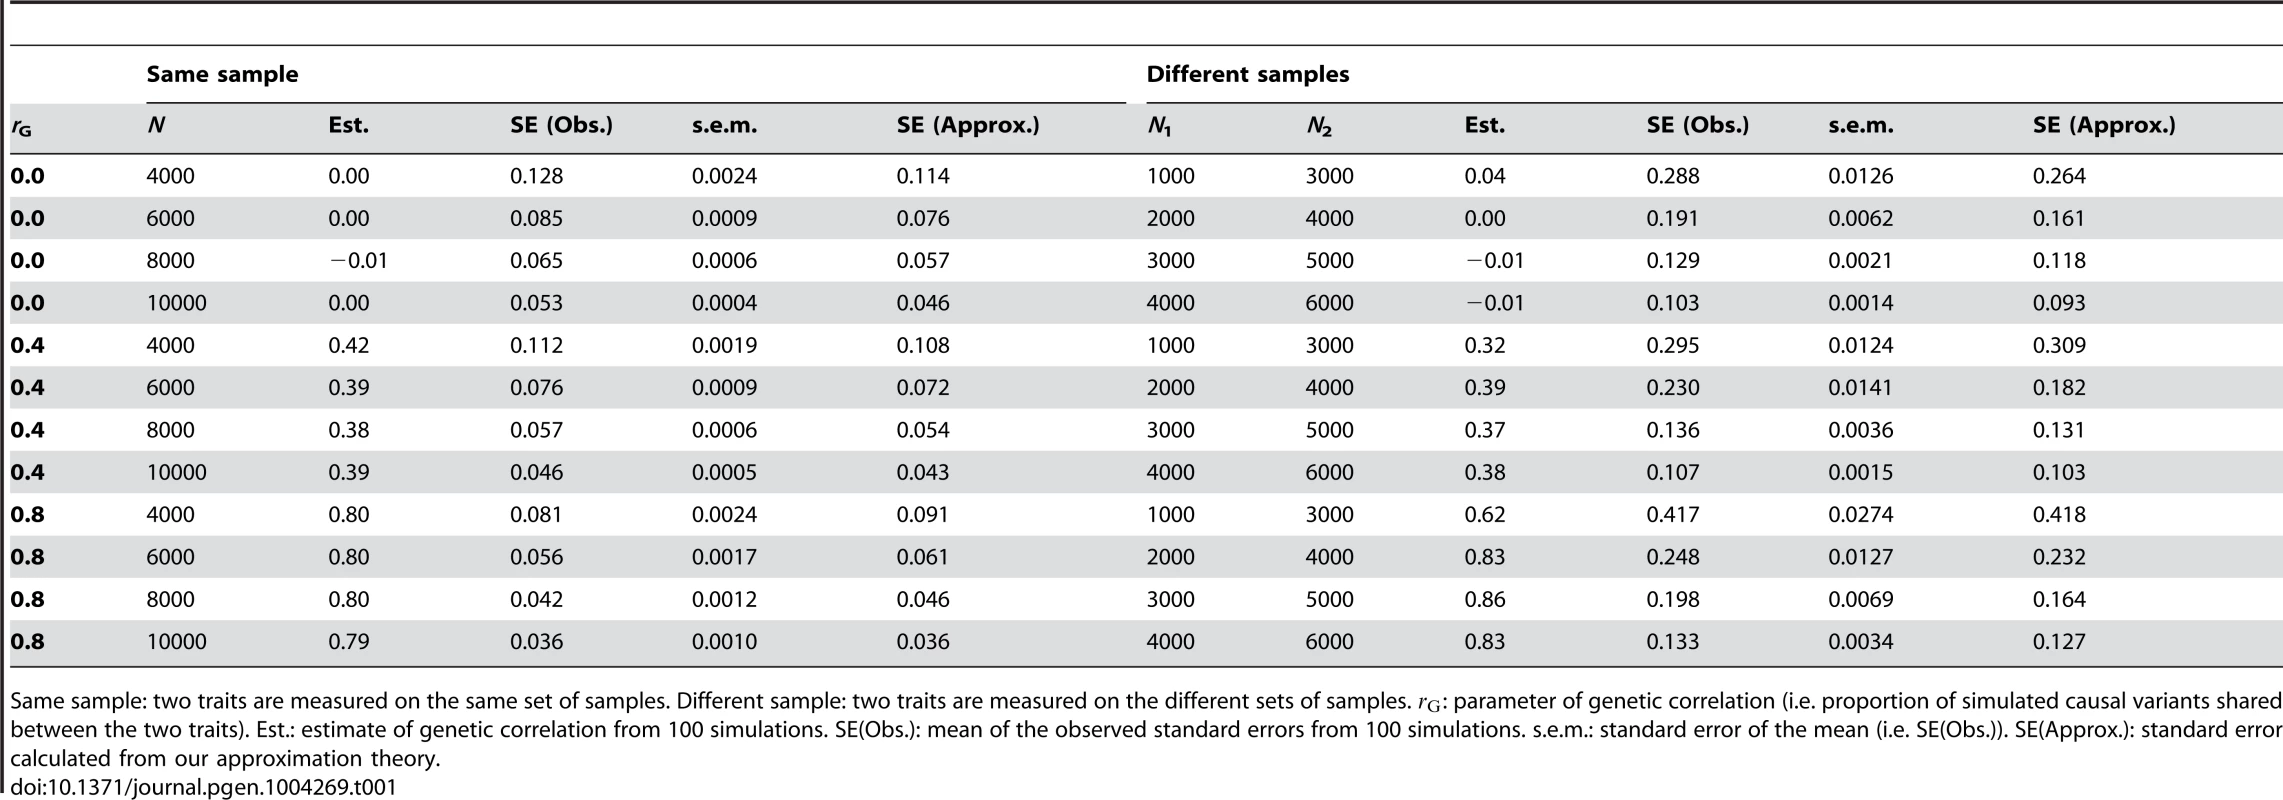 Standard error of the estimate of genetic correlation from a bivariate analysis of two traits measured on the same or different samples using genome-wide SNP data.